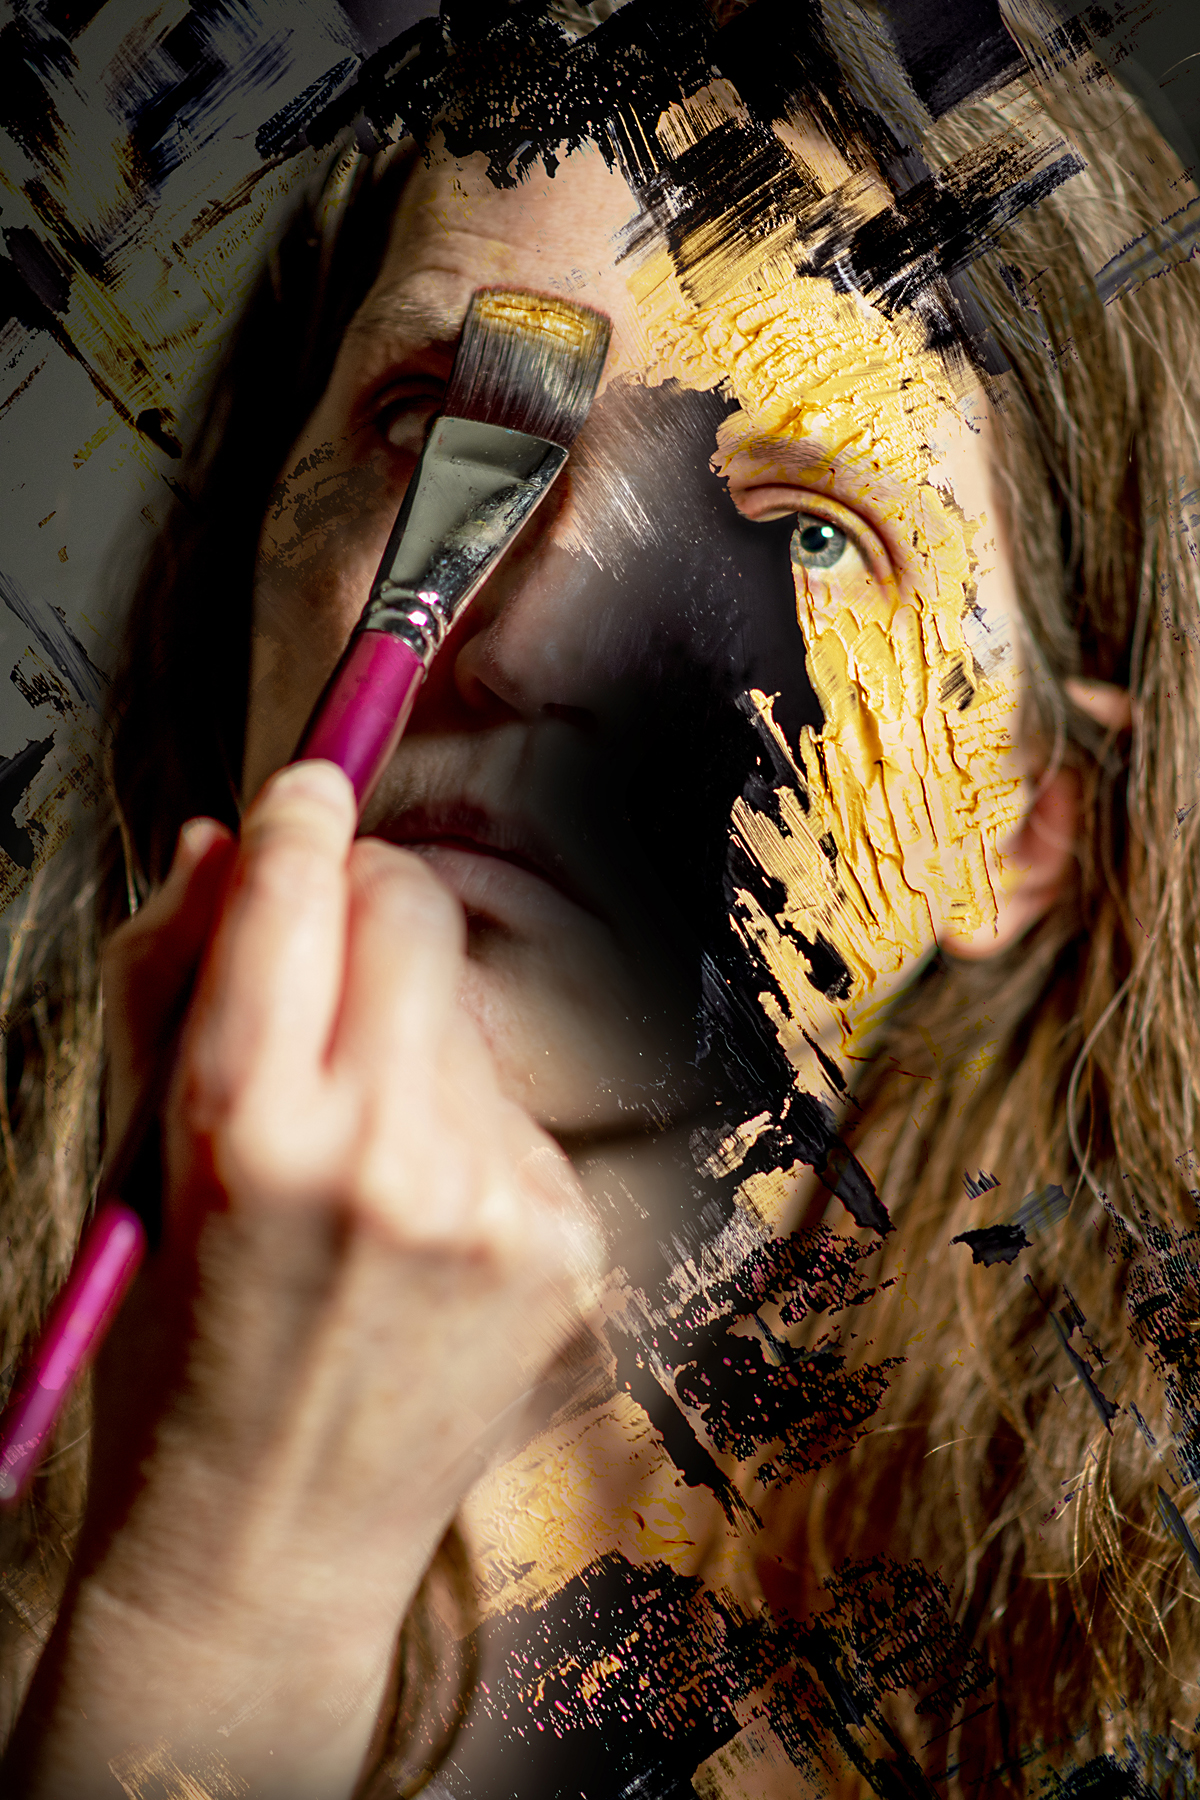 Portrait of a white person with long brown hair staring directly at the camera. The middle of their face is obscured by a black hole and a hand holding a paintbrush seems to add gold paint to their face.